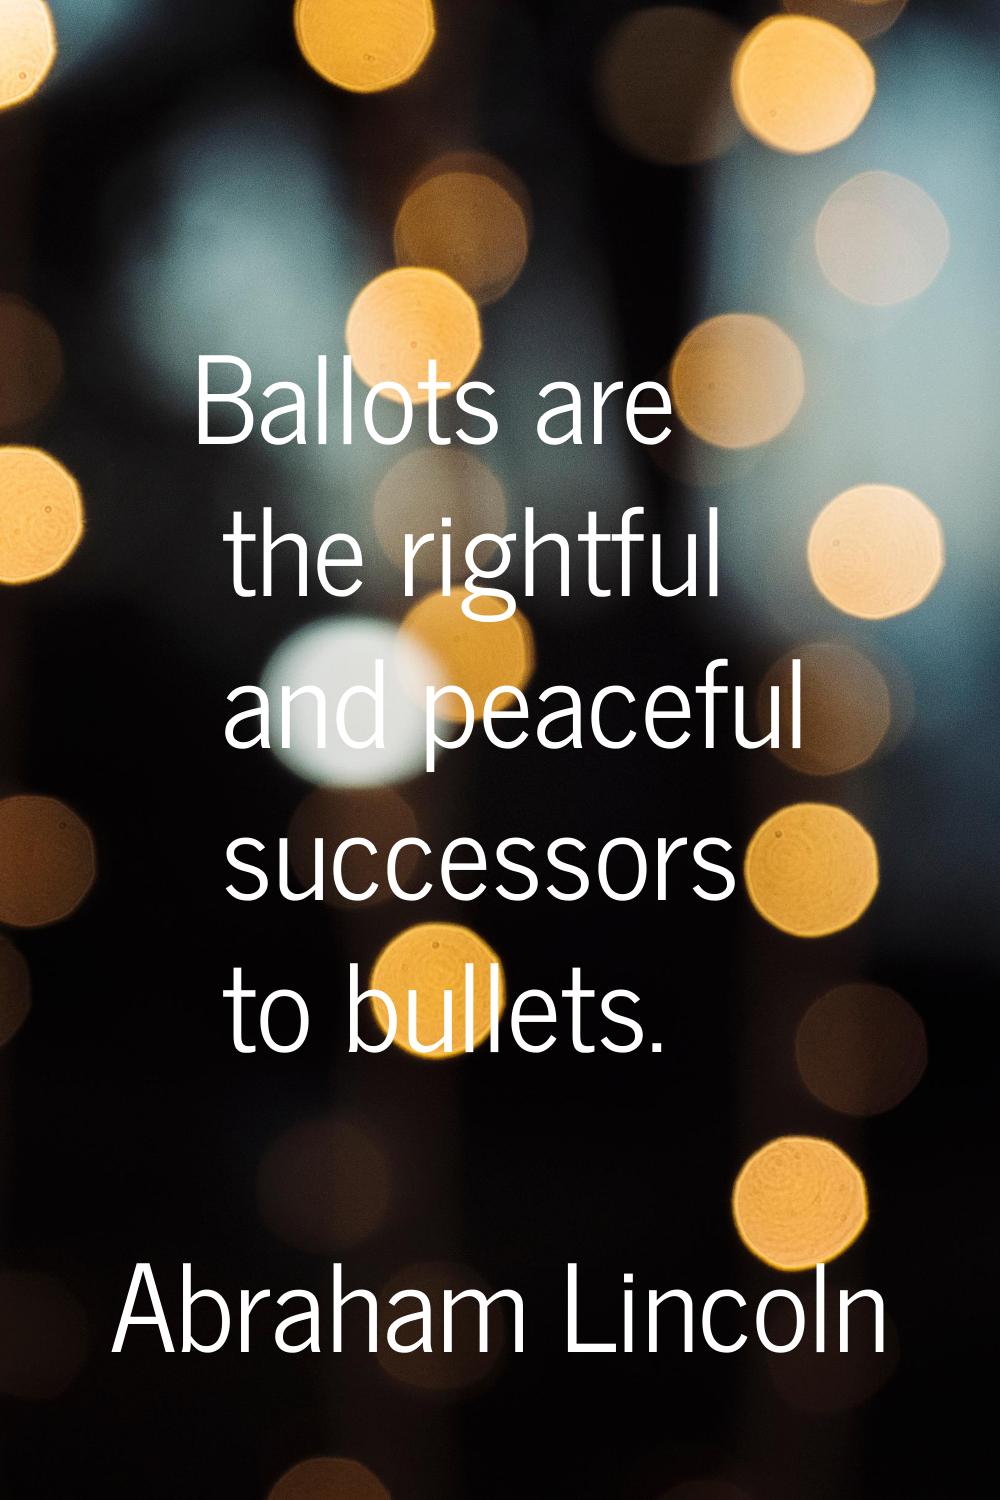 Ballots are the rightful and peaceful successors to bullets.